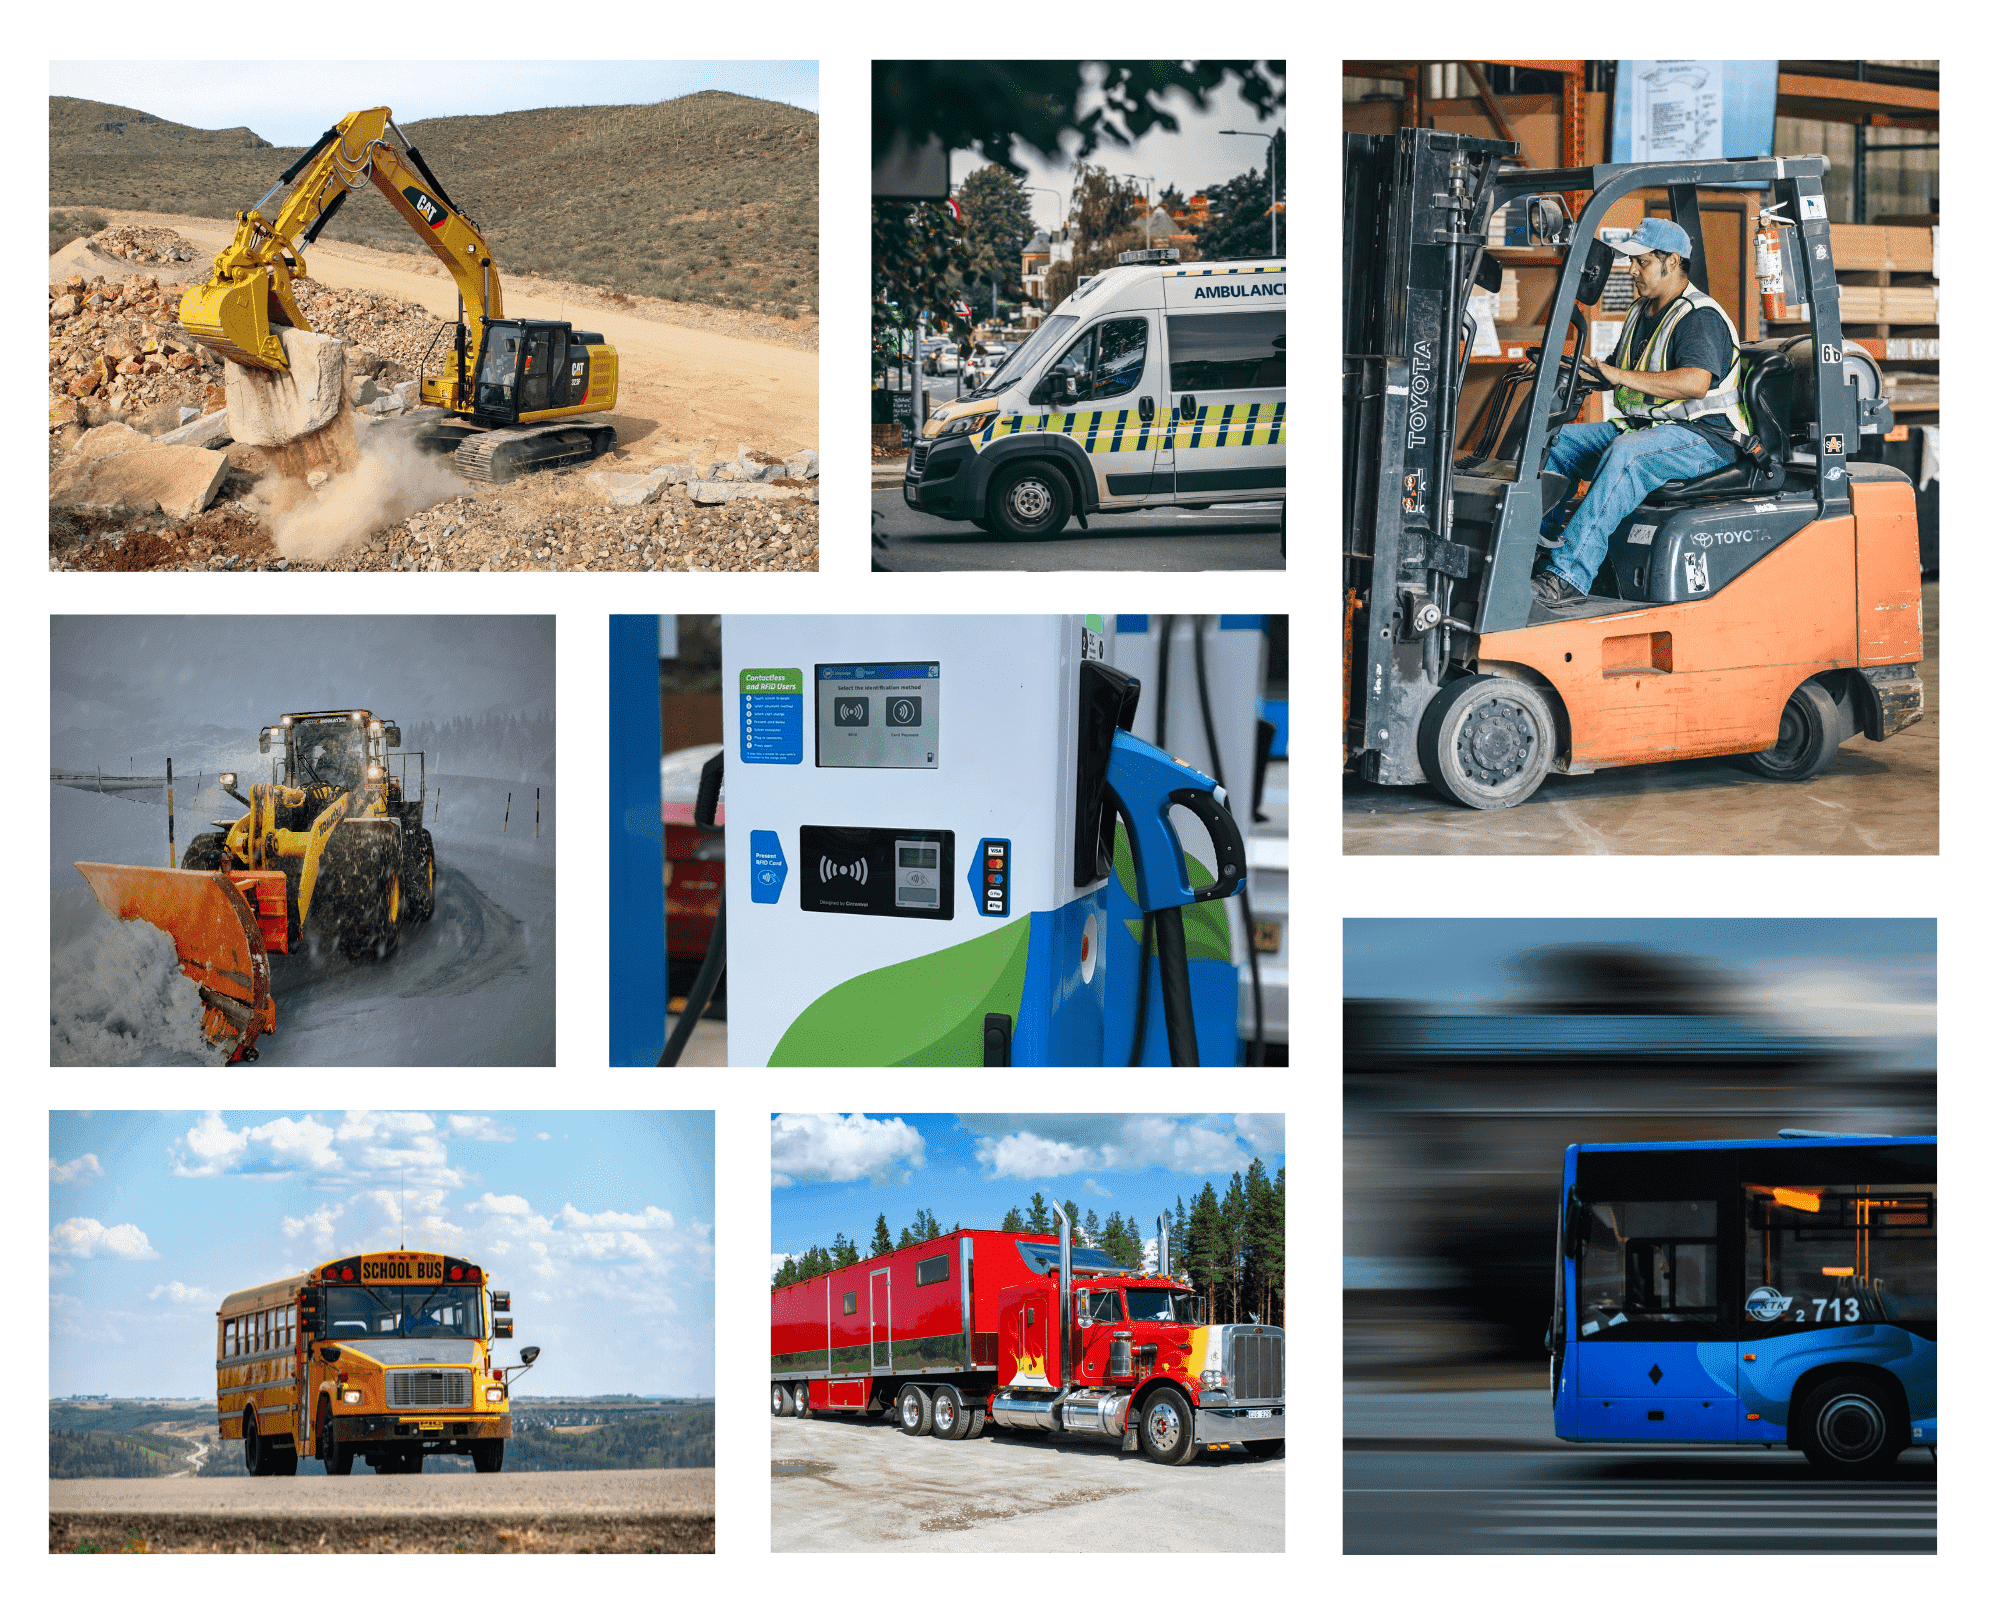 Our products are suitable to many kinds of vehicles, including forklifts, snowplows, buses, police cars, etc.